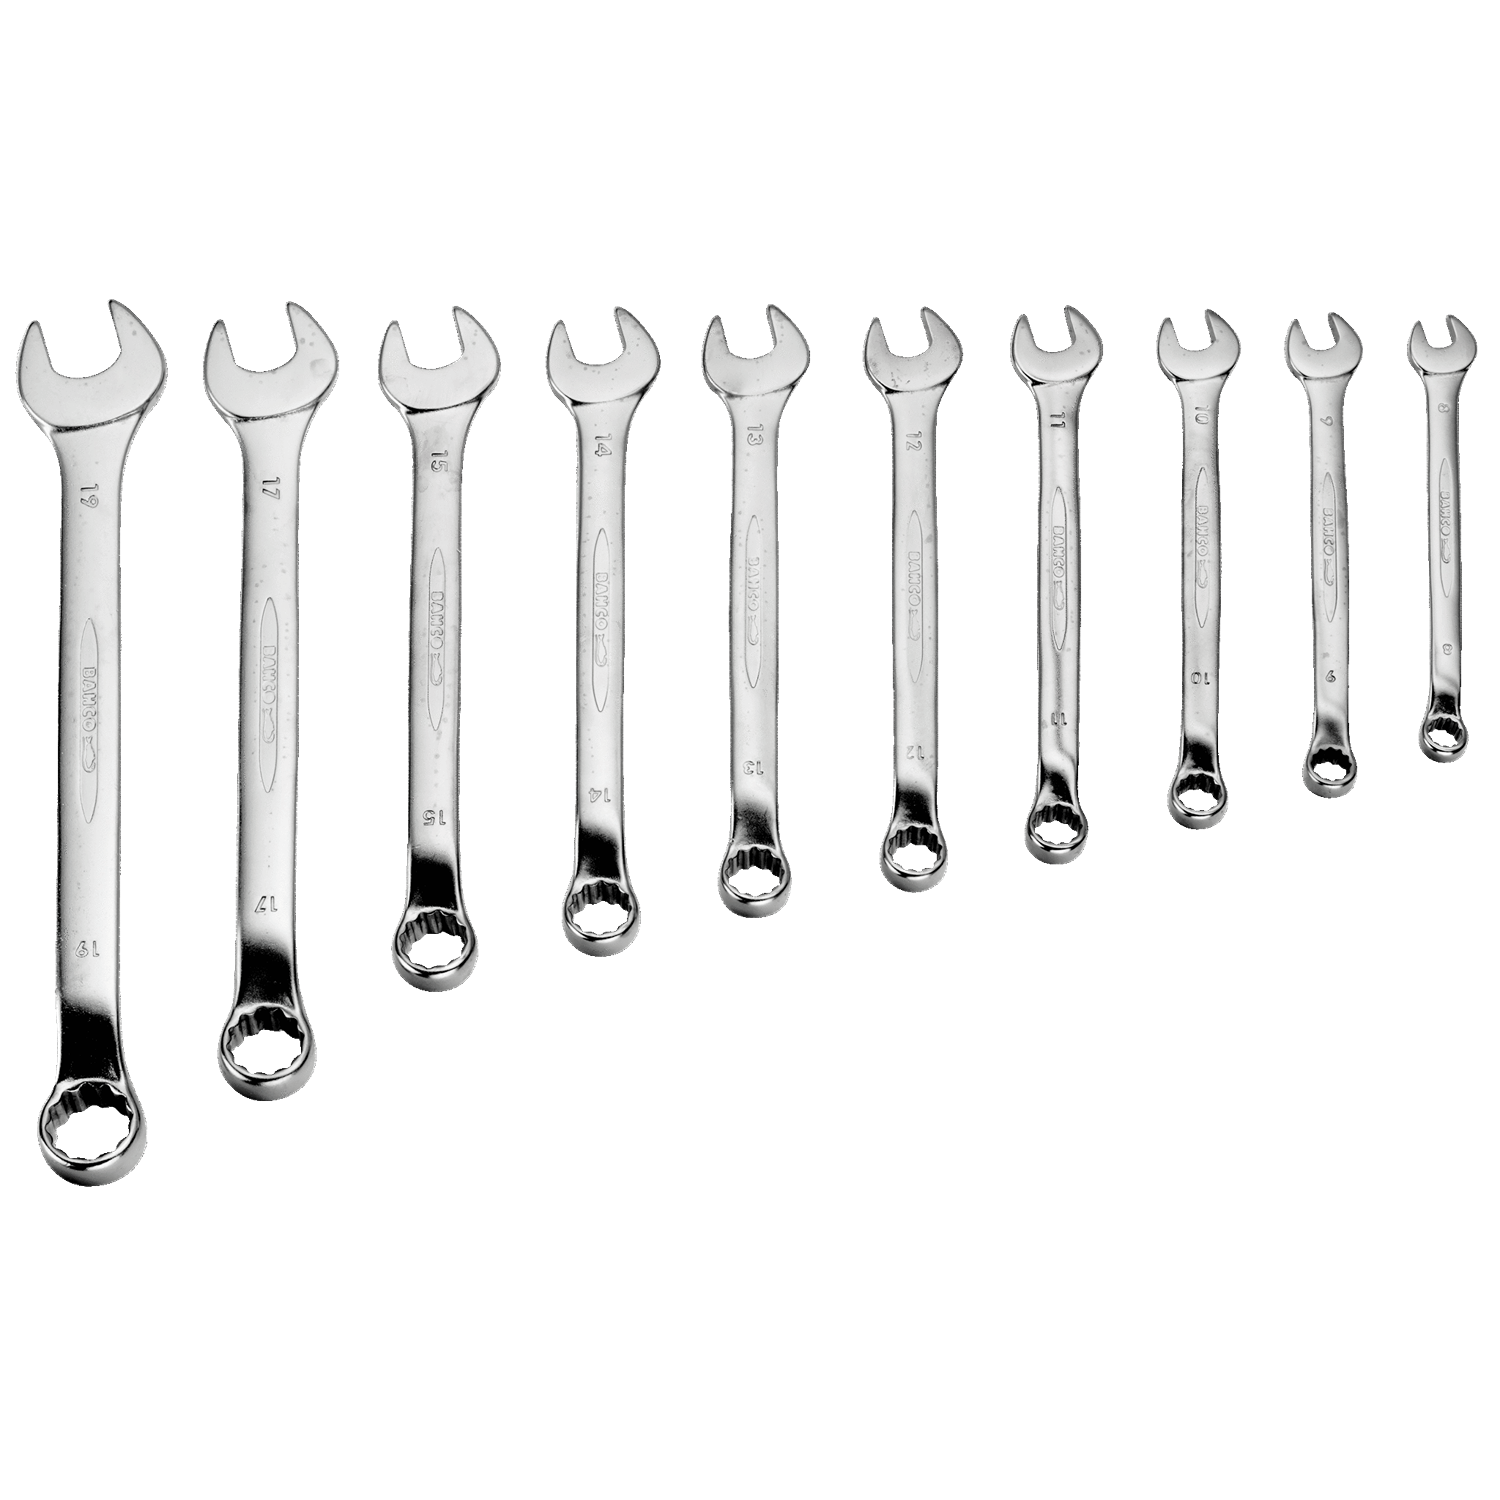 BAHCO 1952M/10 Metric Offset Combination Wrench Set - 10 Pcs/Box - Premium Combination Wrench from BAHCO - Shop now at Yew Aik.